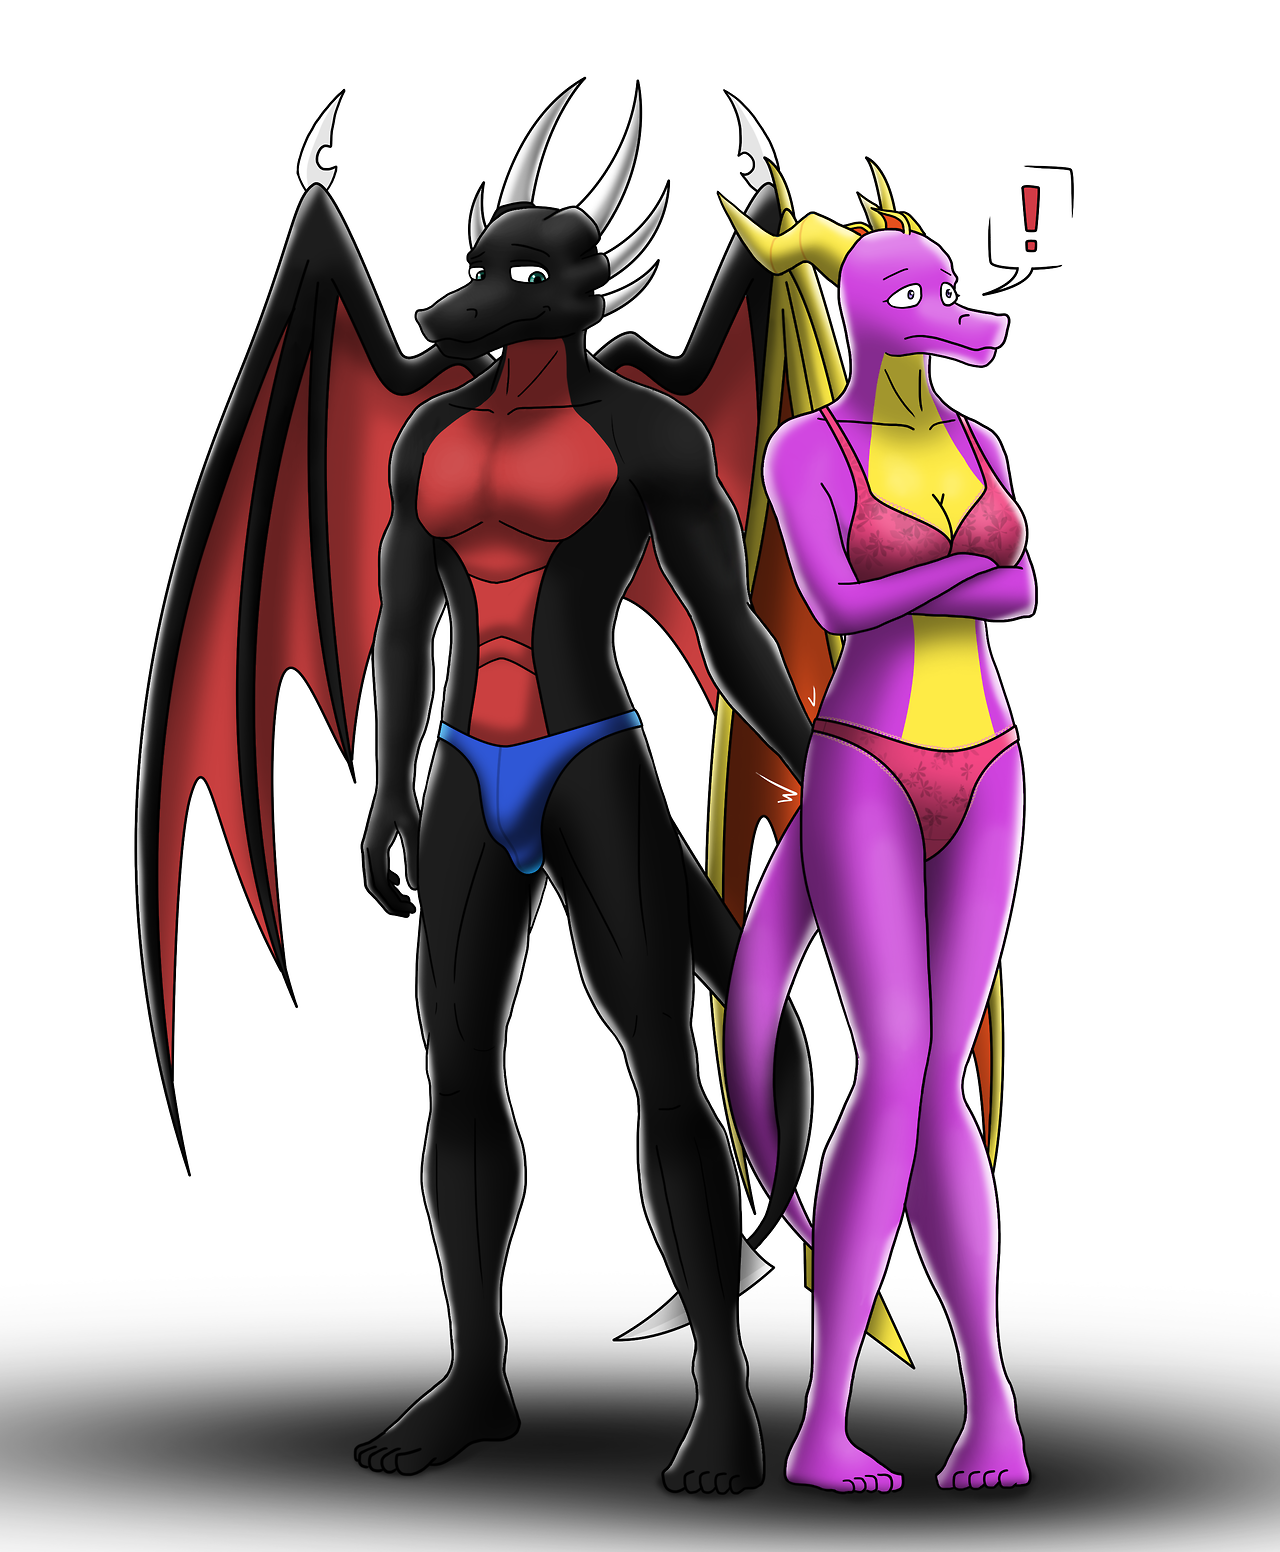 I genderbent the dragon couple, so here you have Spyro and Cynder, their sexes flipped!